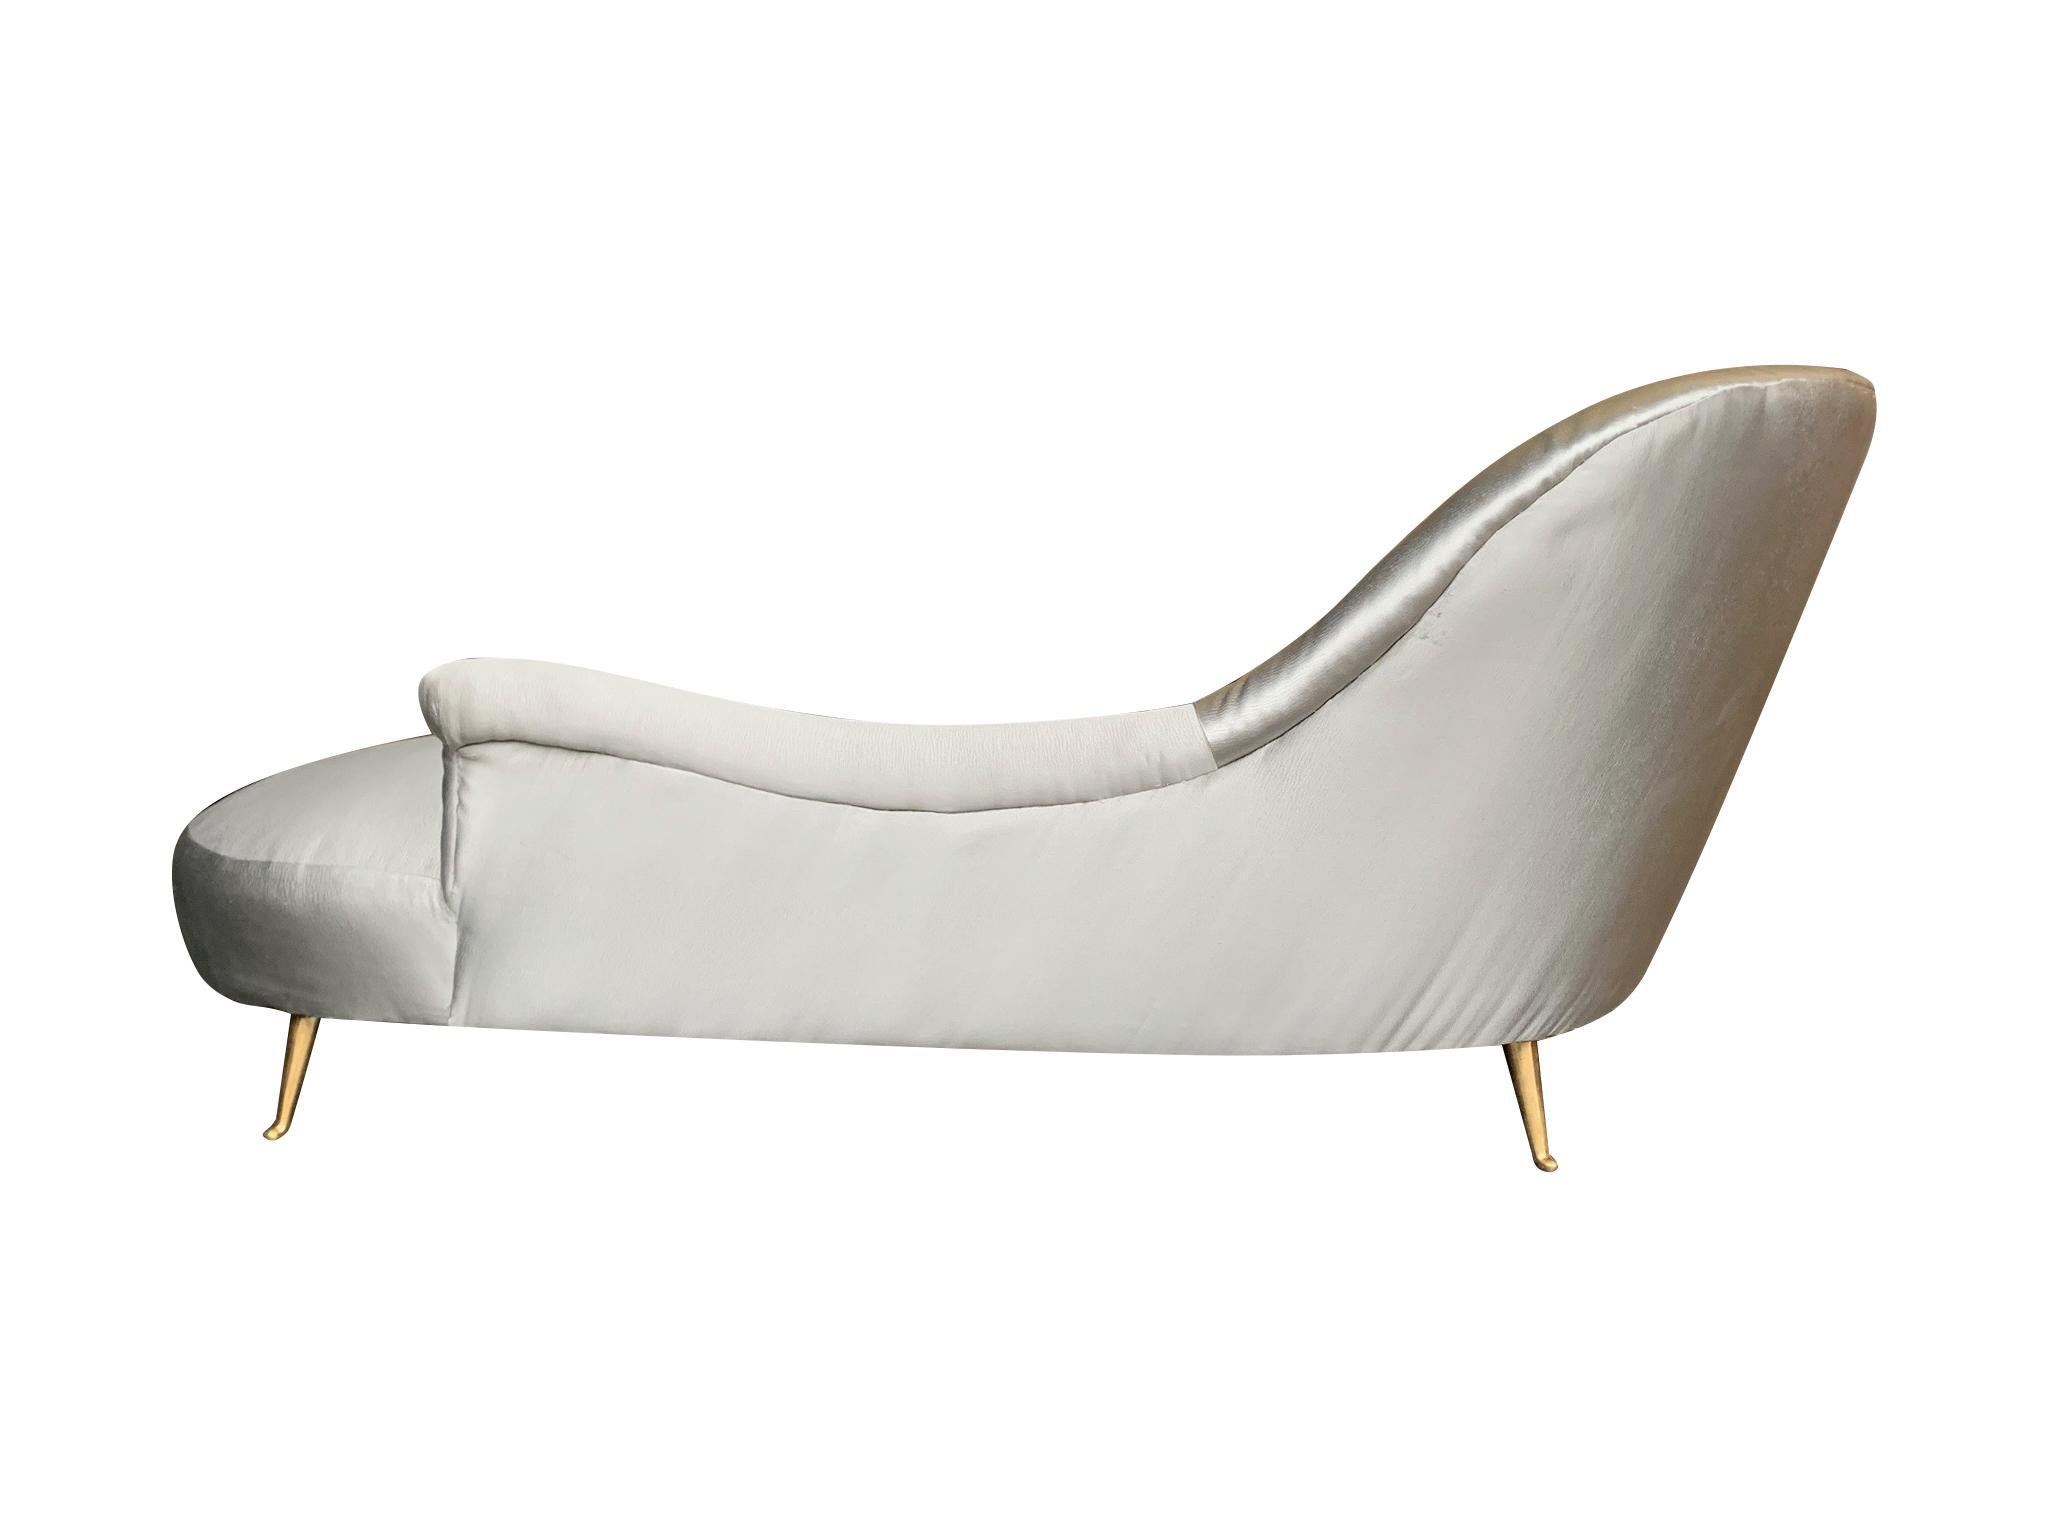 Italian Chaise Longue Upholstered in Champagne Grey Fabric with Brass Feet (Messing)